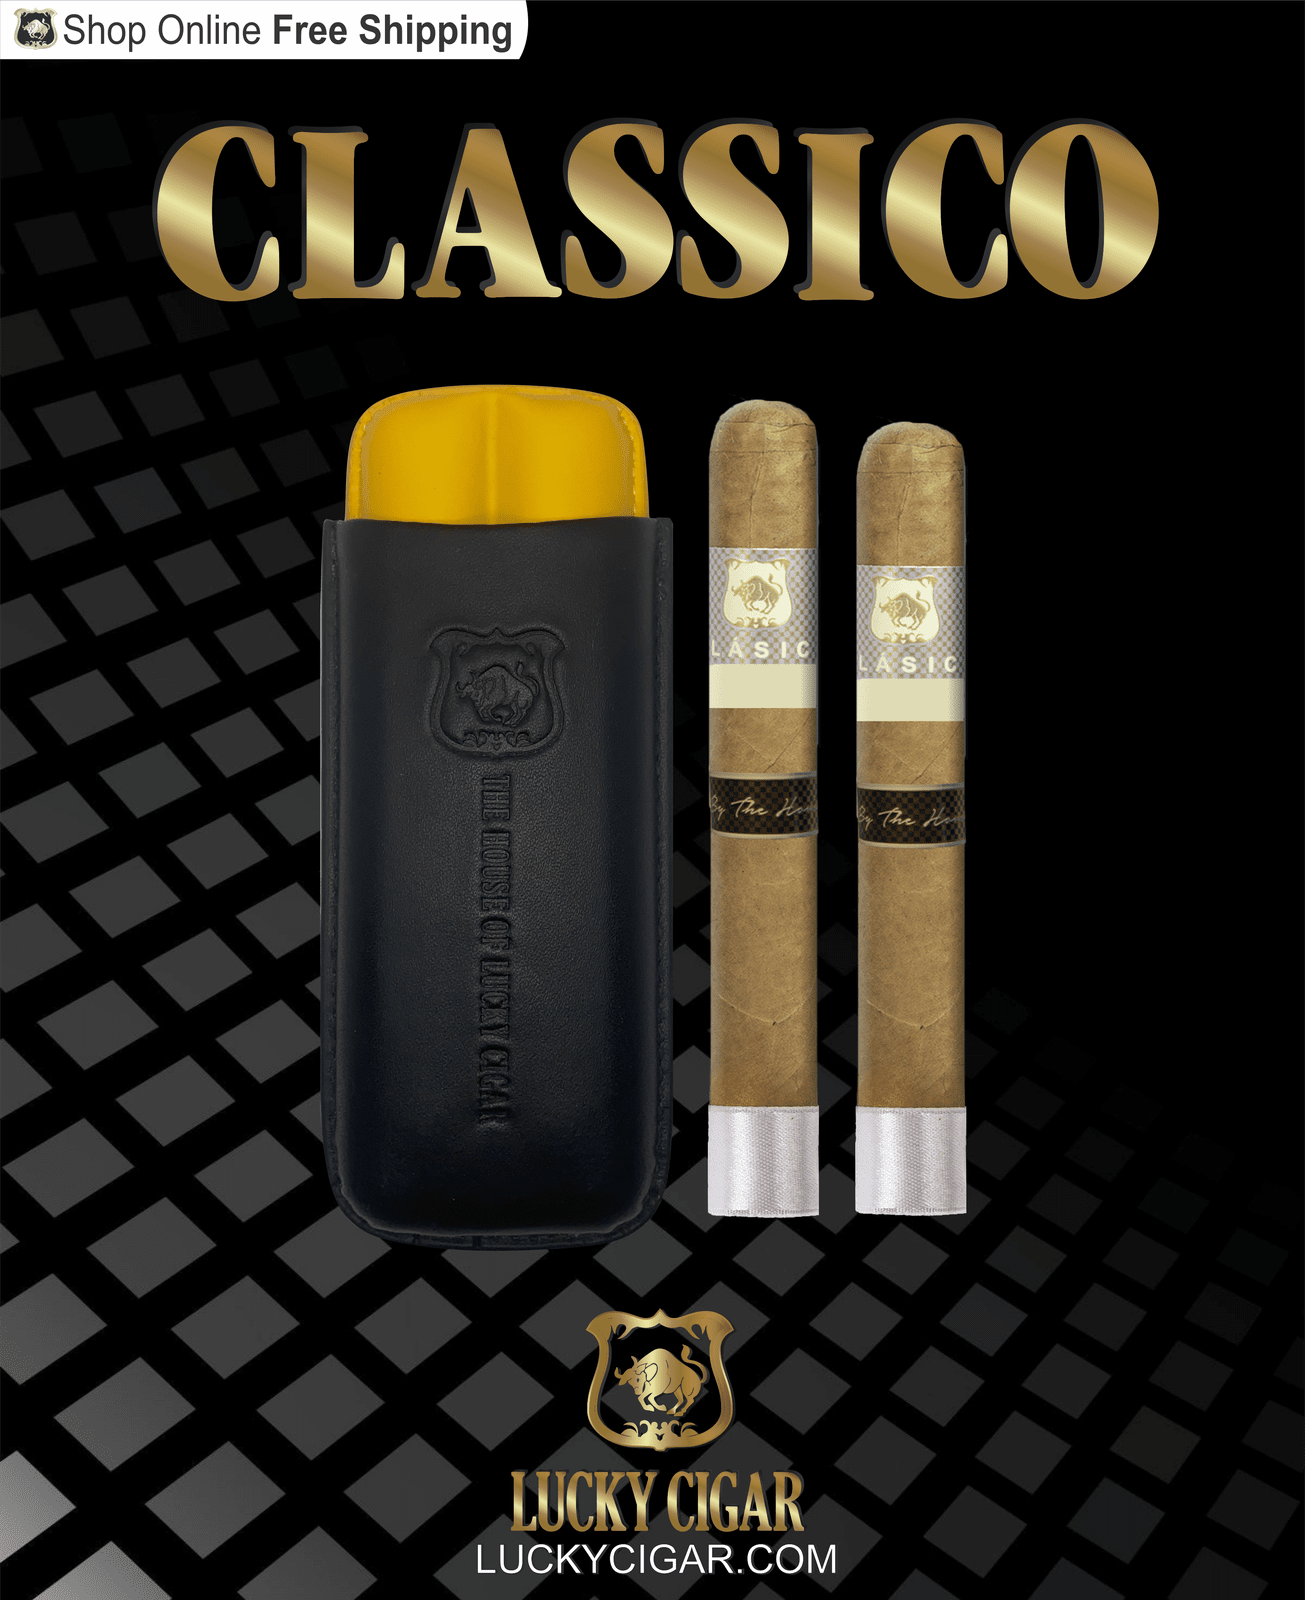 Lucky Cigar Sampler Sets: Set of 2 Cigars with Travel Humidor Case